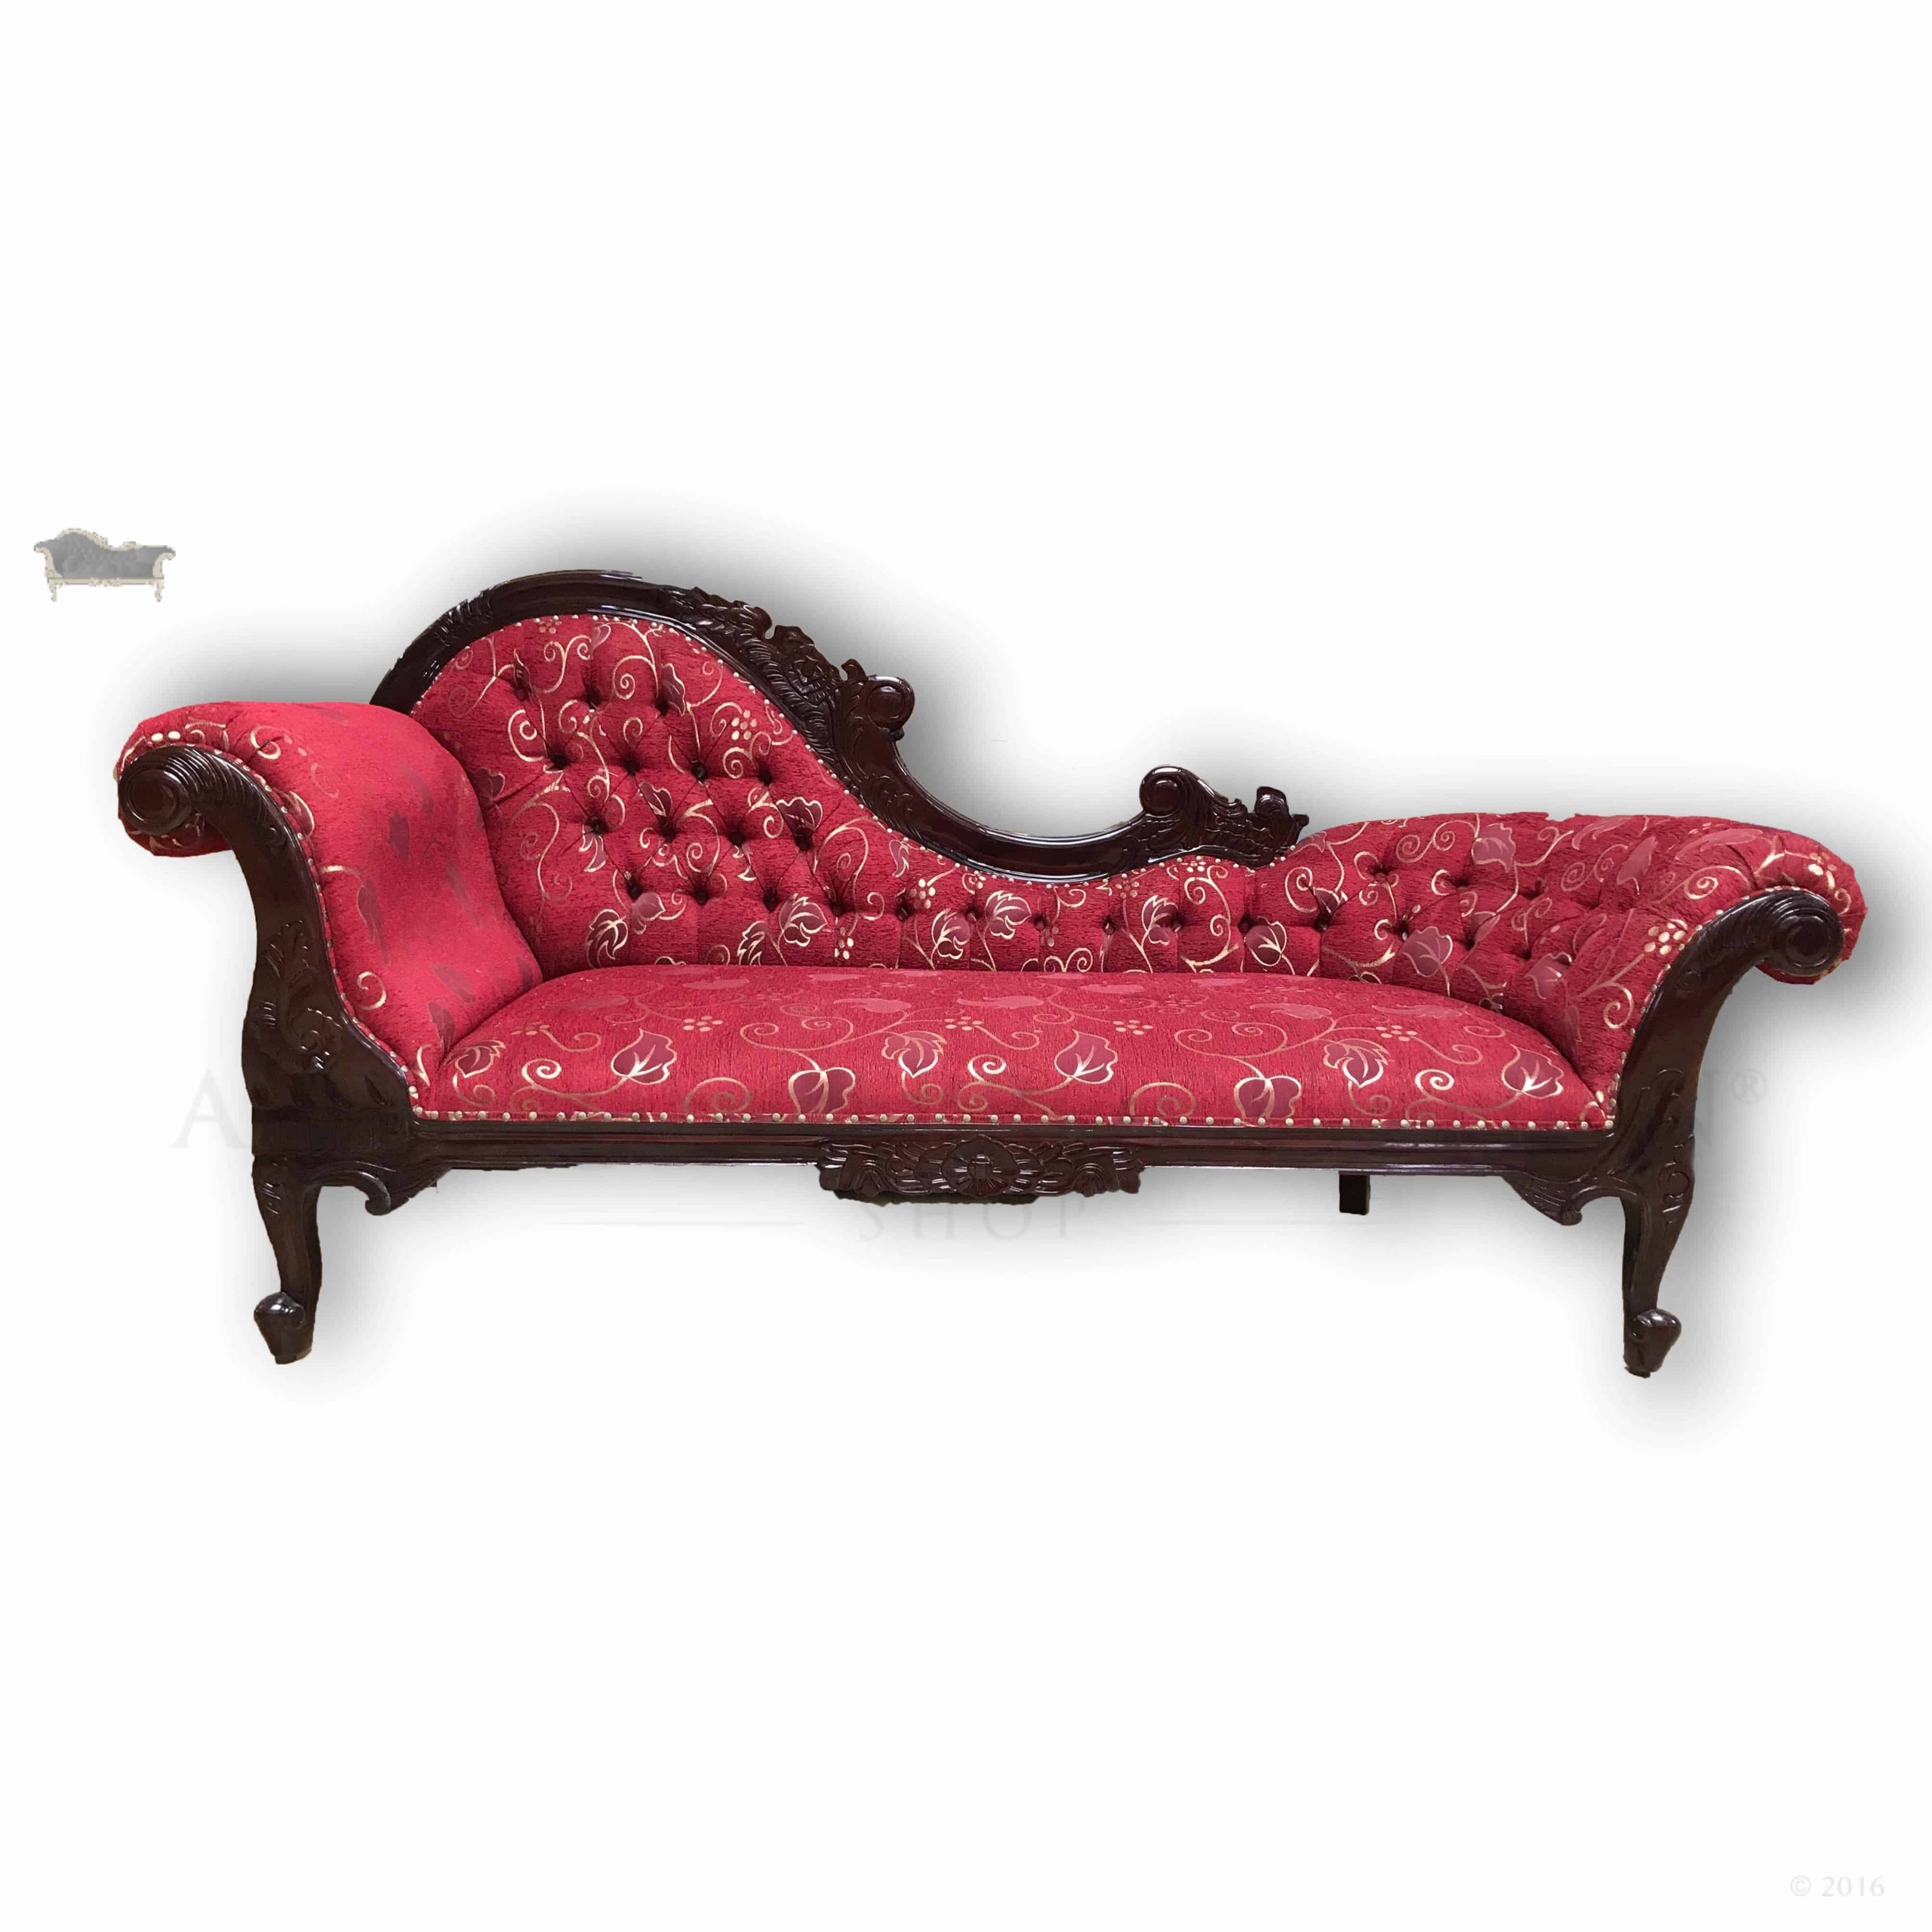 Chaise lounge french provincial red and gold upholstery 1